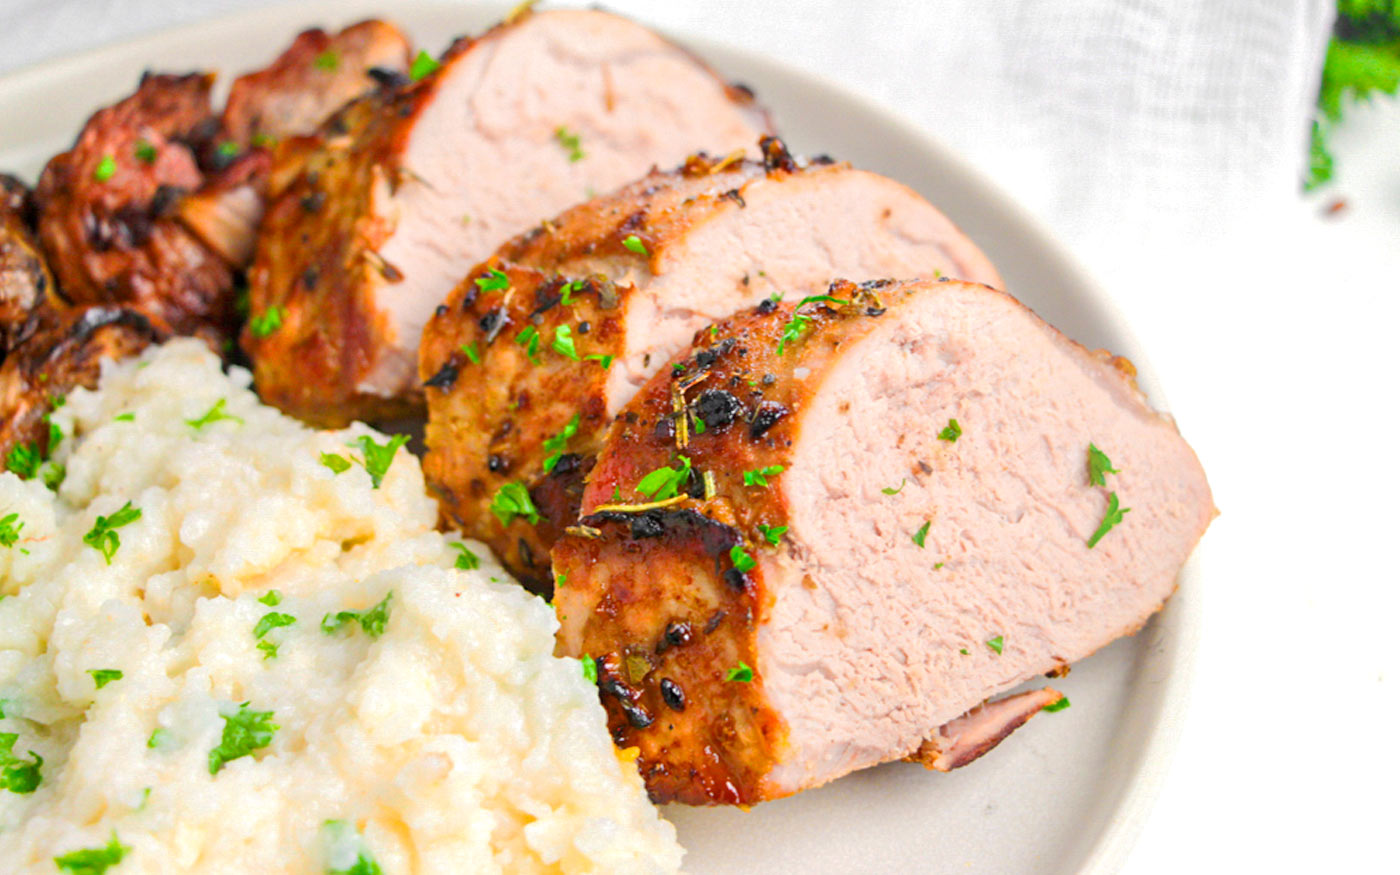 Air fryer pork tenderloin sliced and displayed on plate with mashed potatoes.